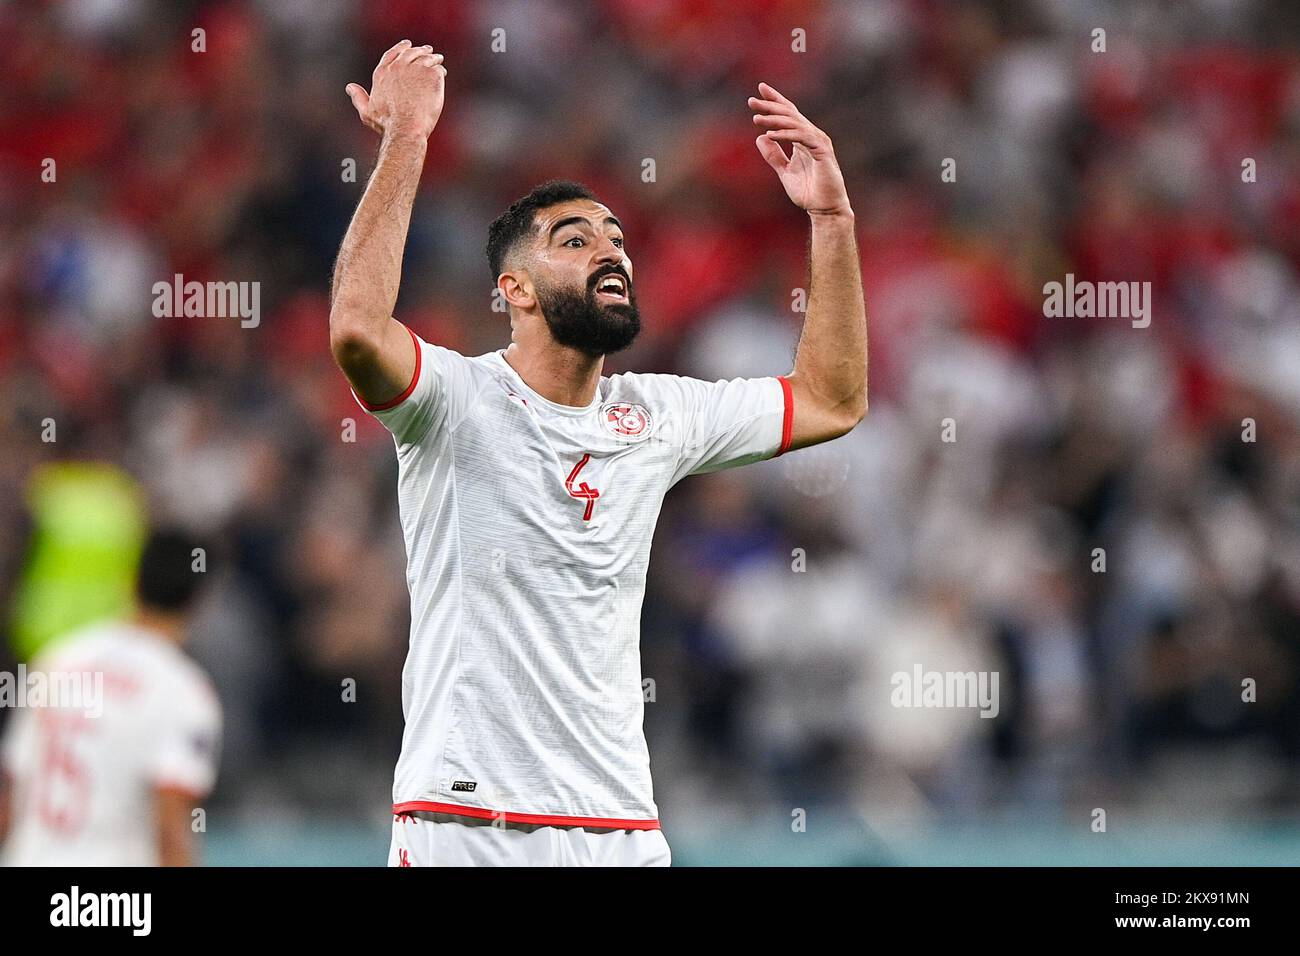 AL RAYYAN, QATAR - NOVEMBER 30: Yassine Meriah of Tunisia reacts during the Group D - FIFA World Cup Qatar 2022 match between Tunisia and France at the Education City Stadium on November 30, 2022 in Al Rayyan, Qatar (Photo by Pablo Morano/BSR Agency) Credit: BSR Agency/Alamy Live News Stock Photo